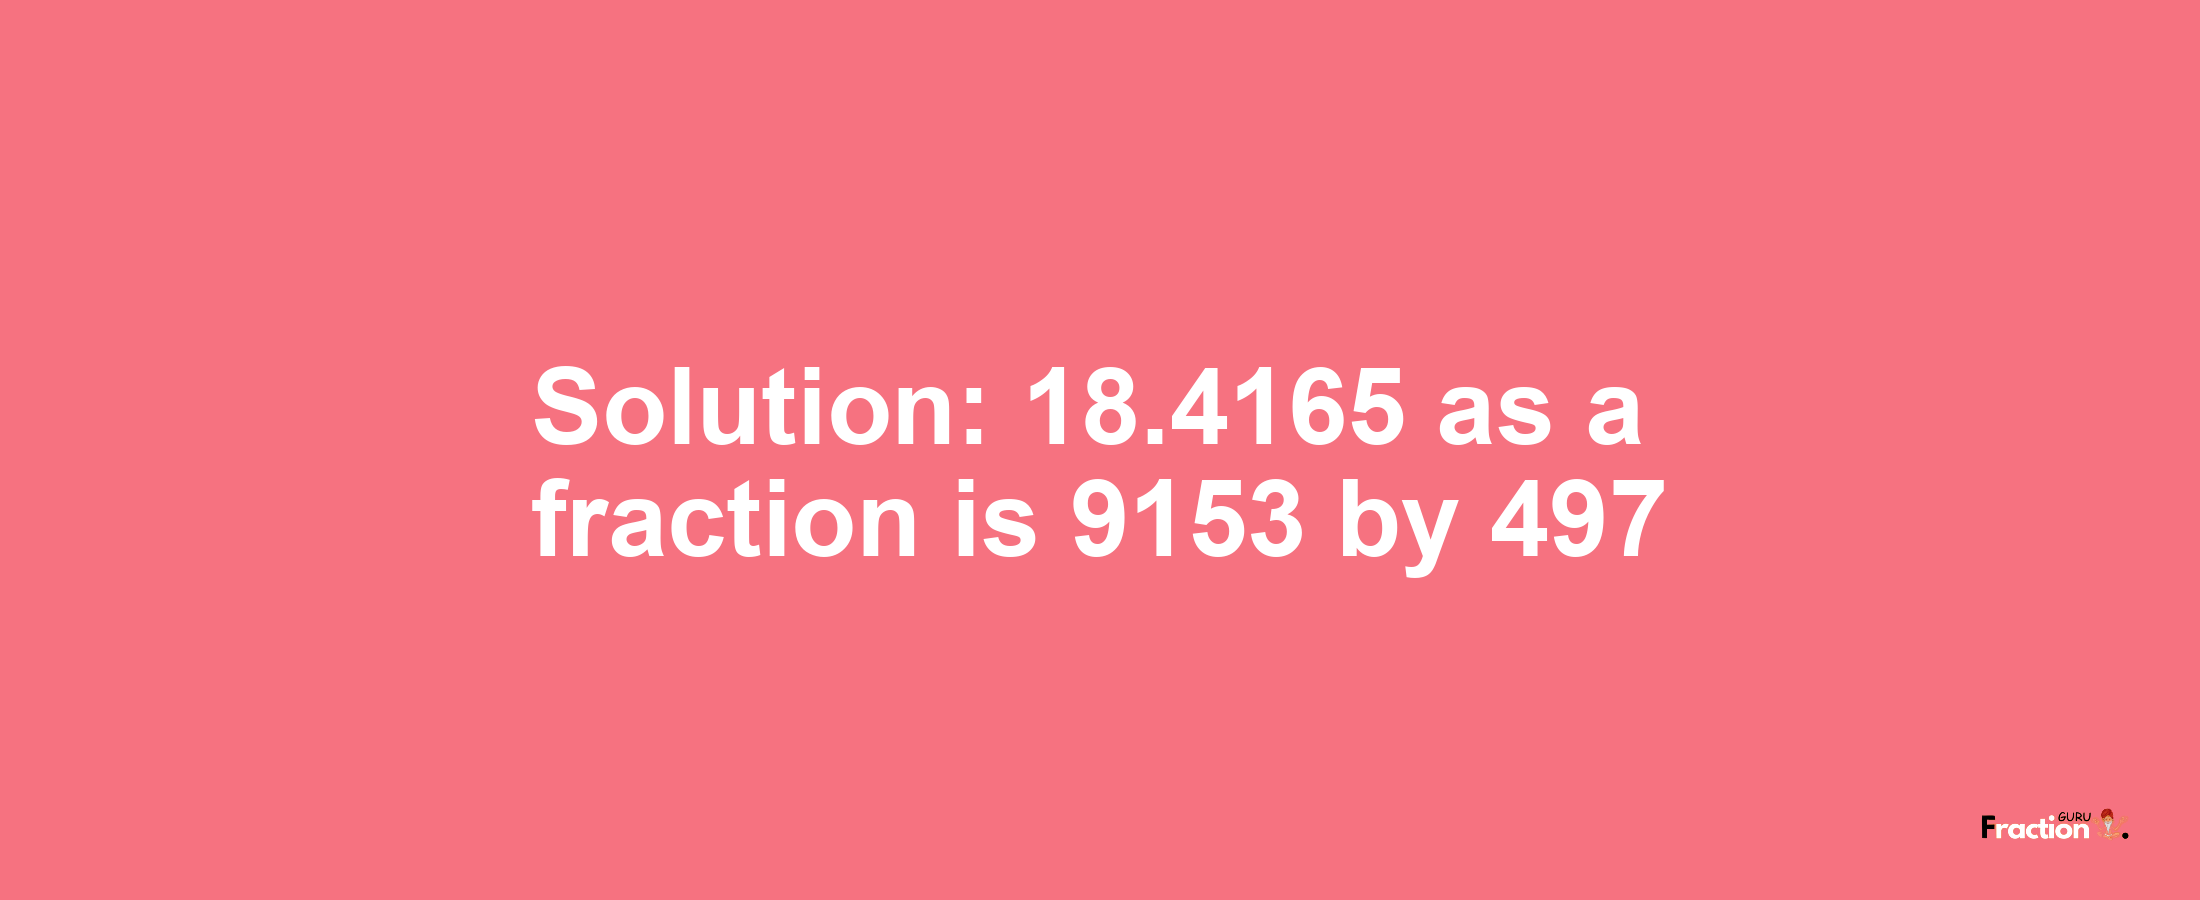 Solution:18.4165 as a fraction is 9153/497